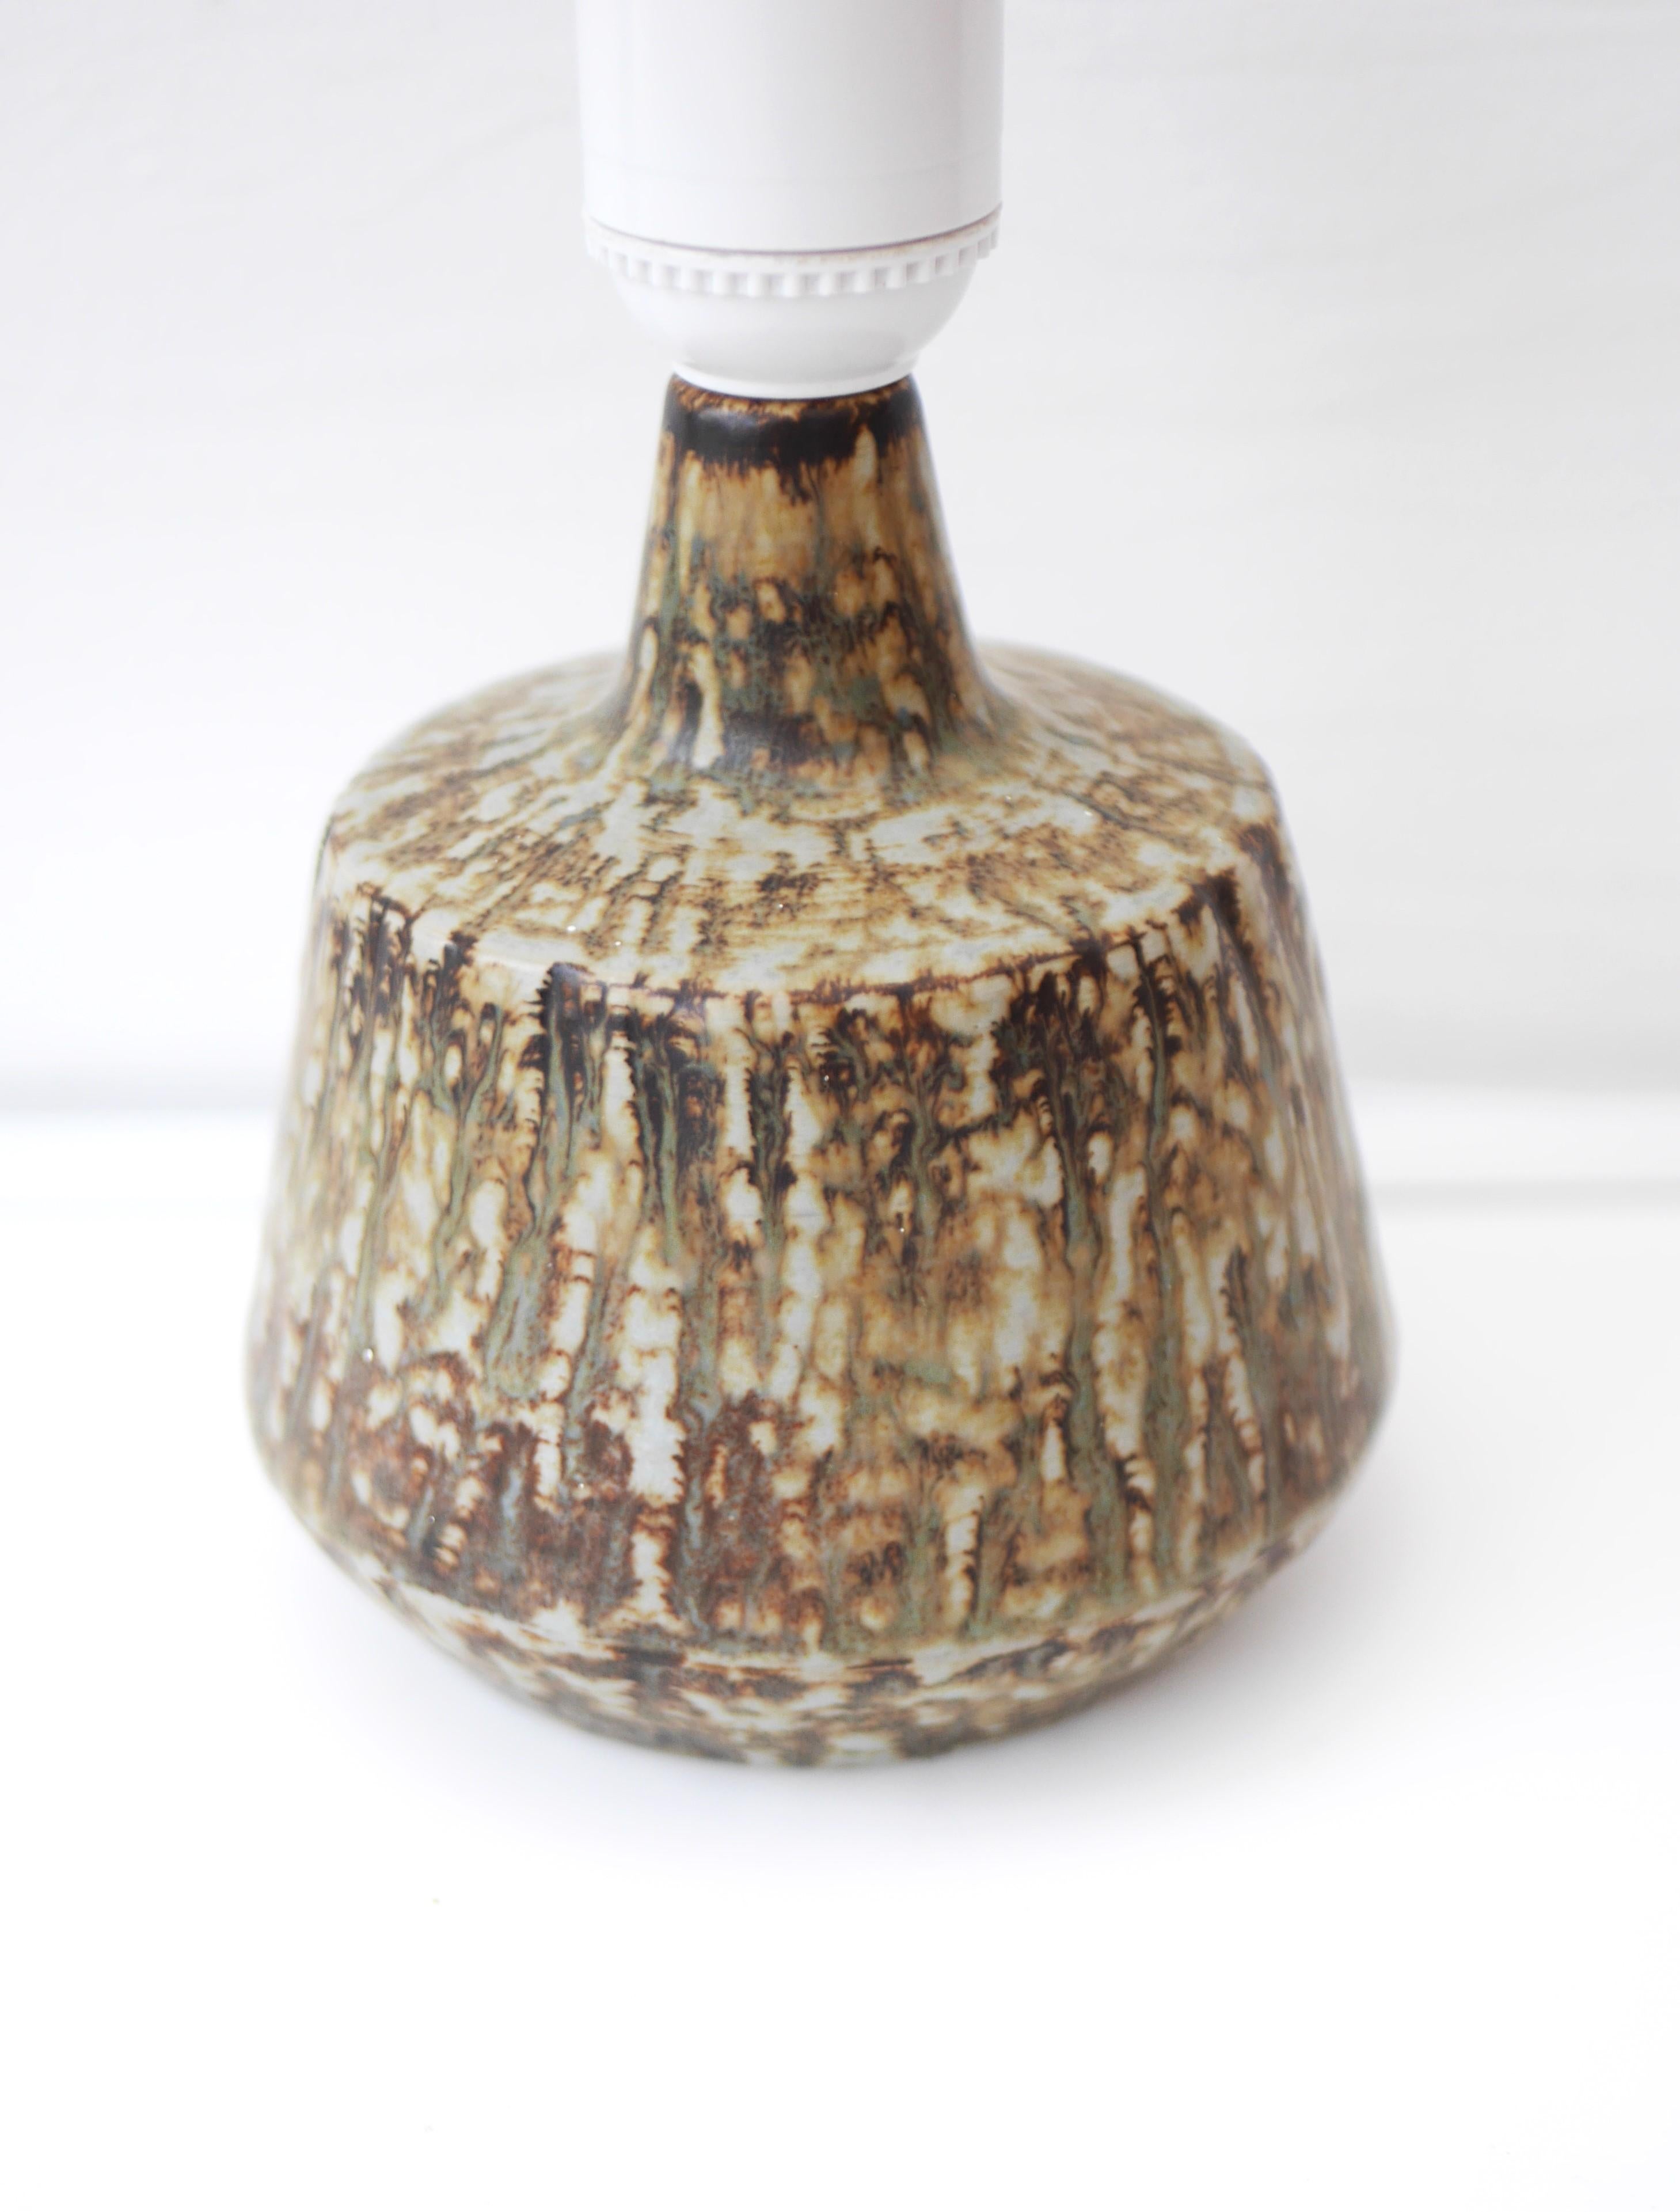 A fantastic and rare vintage ceramic table lamp base known as 